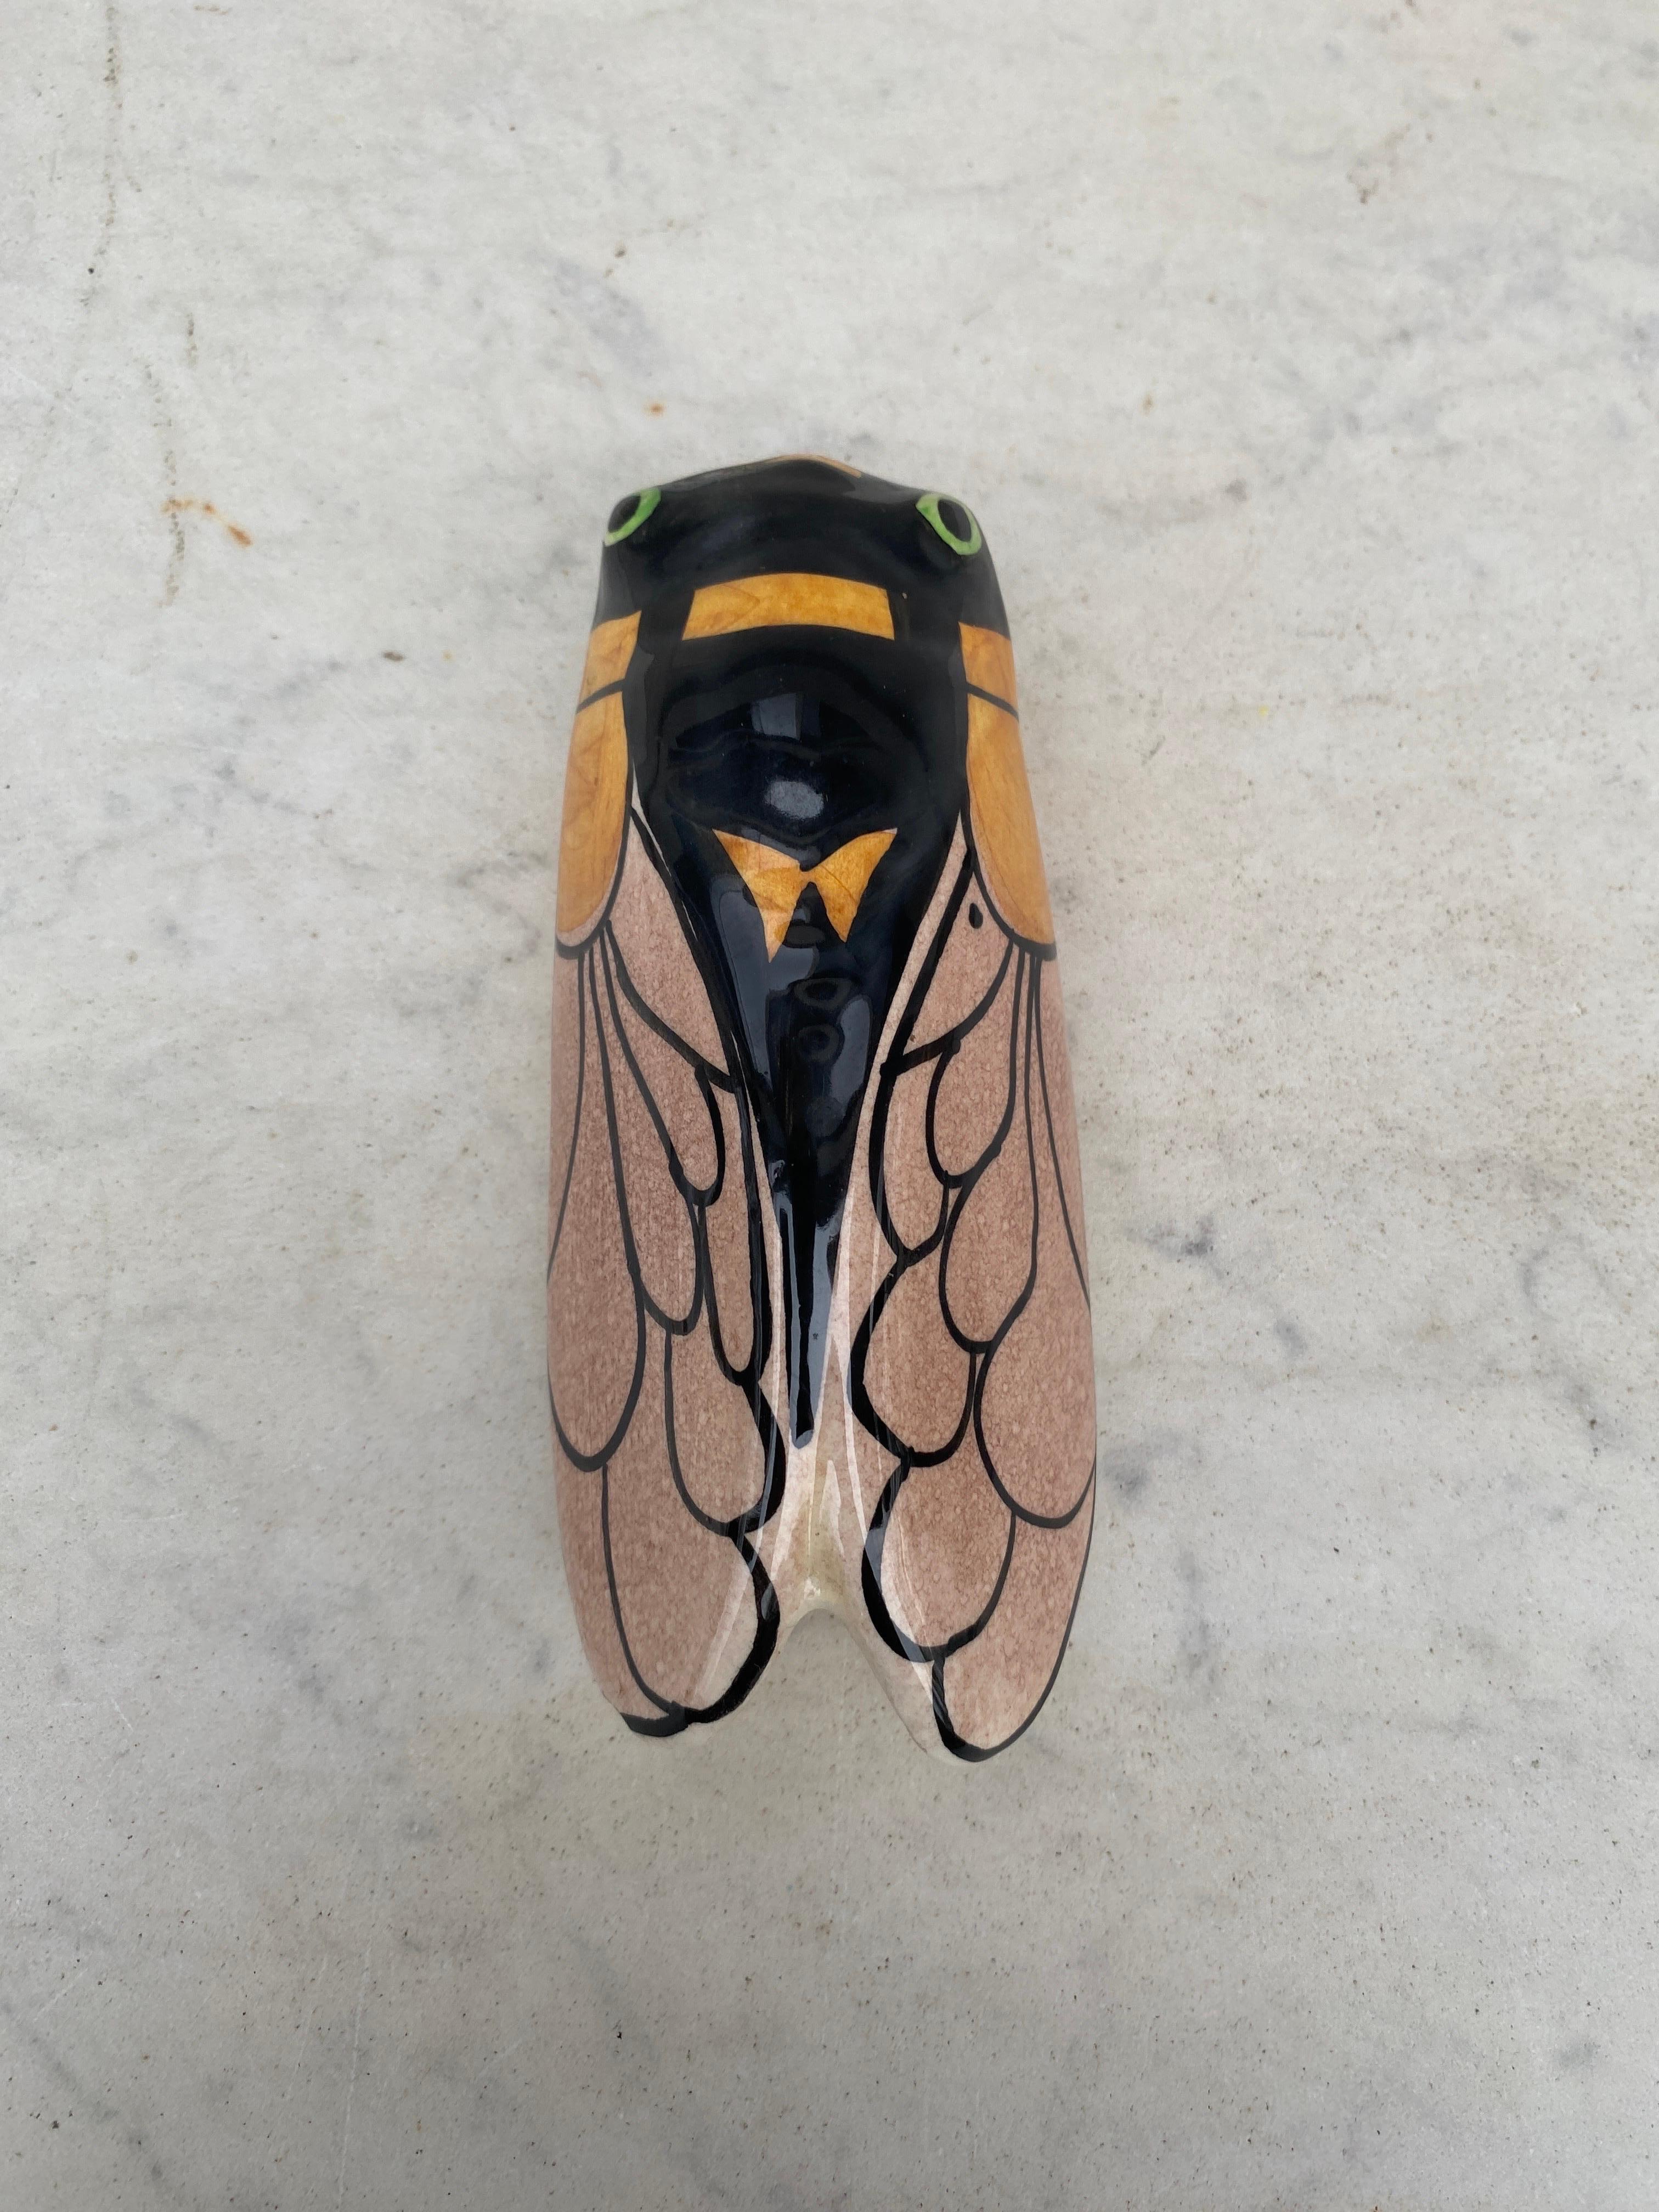 French Majolica cicada wall pocket  signed Vallauris from Provence.
Height / 5.3 inches.